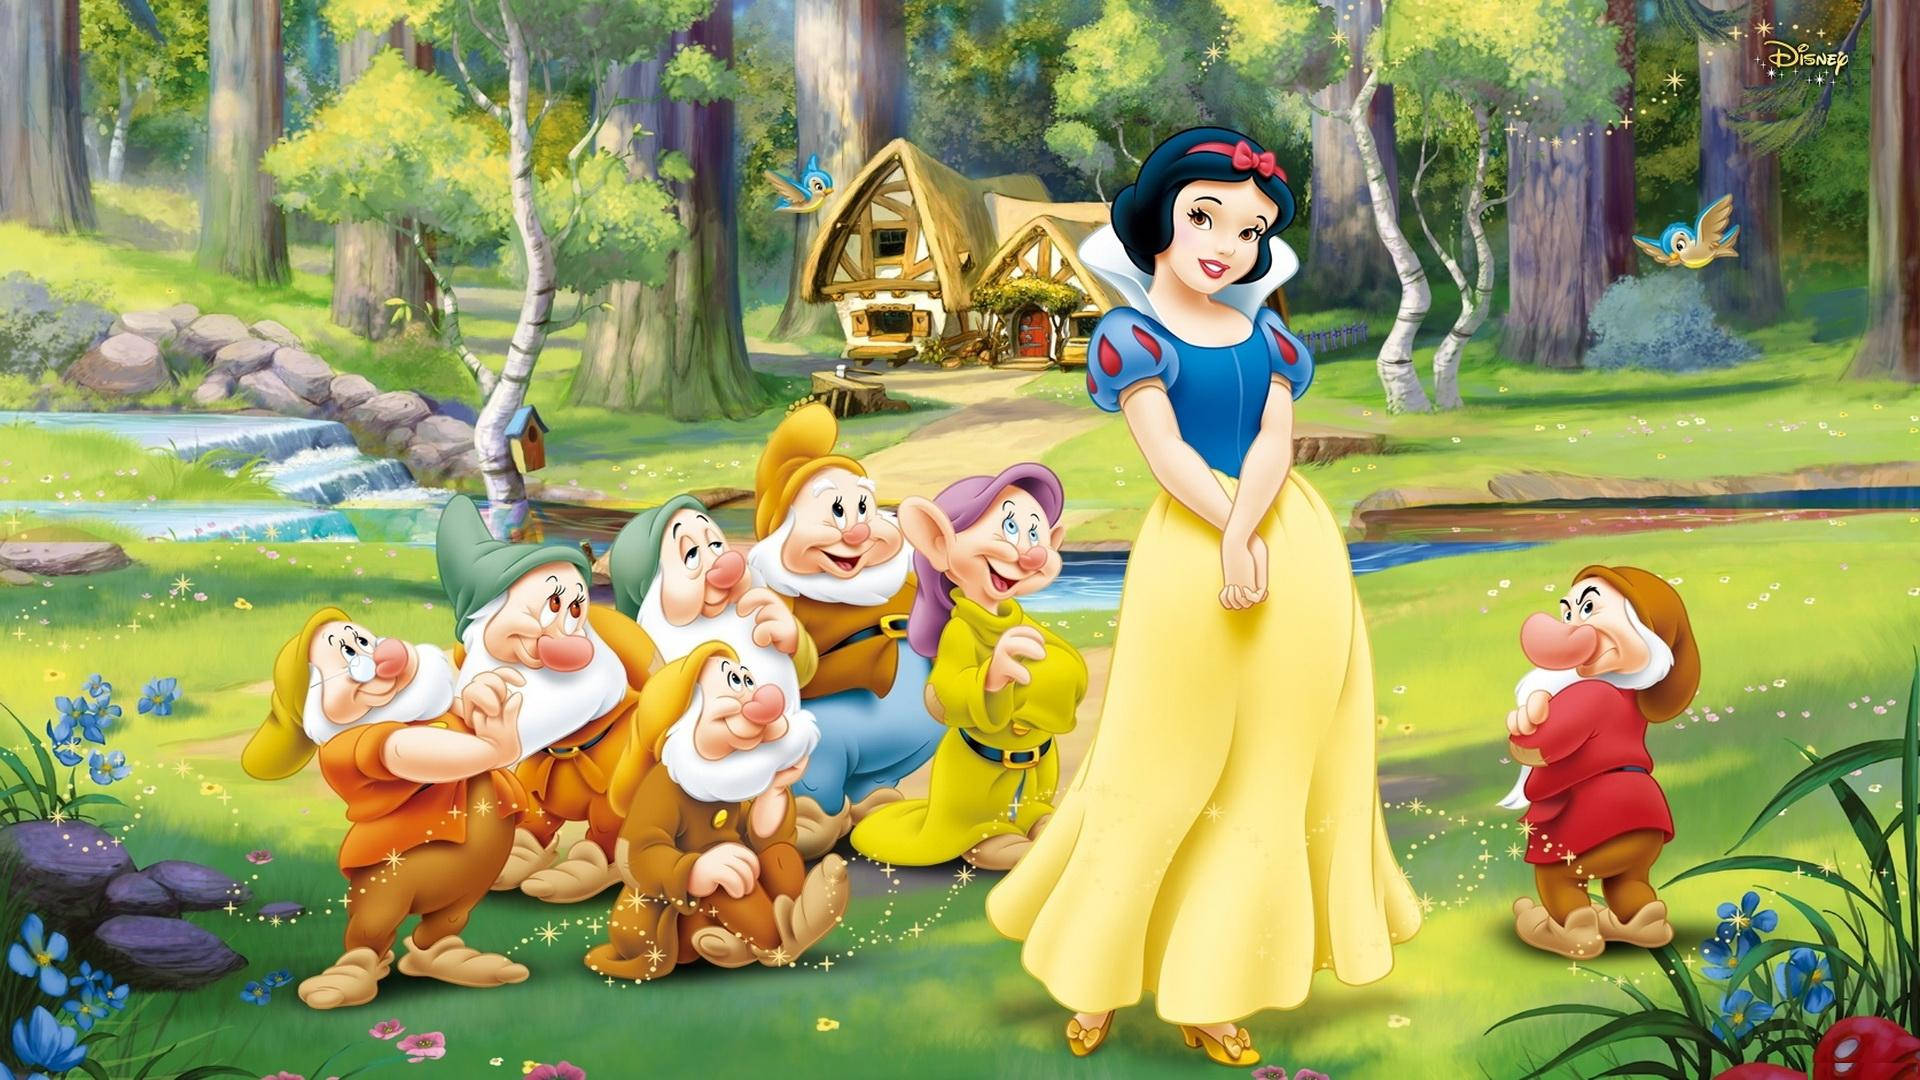 Snow White with animal friends in Disney's classic fairytale Wallpaper